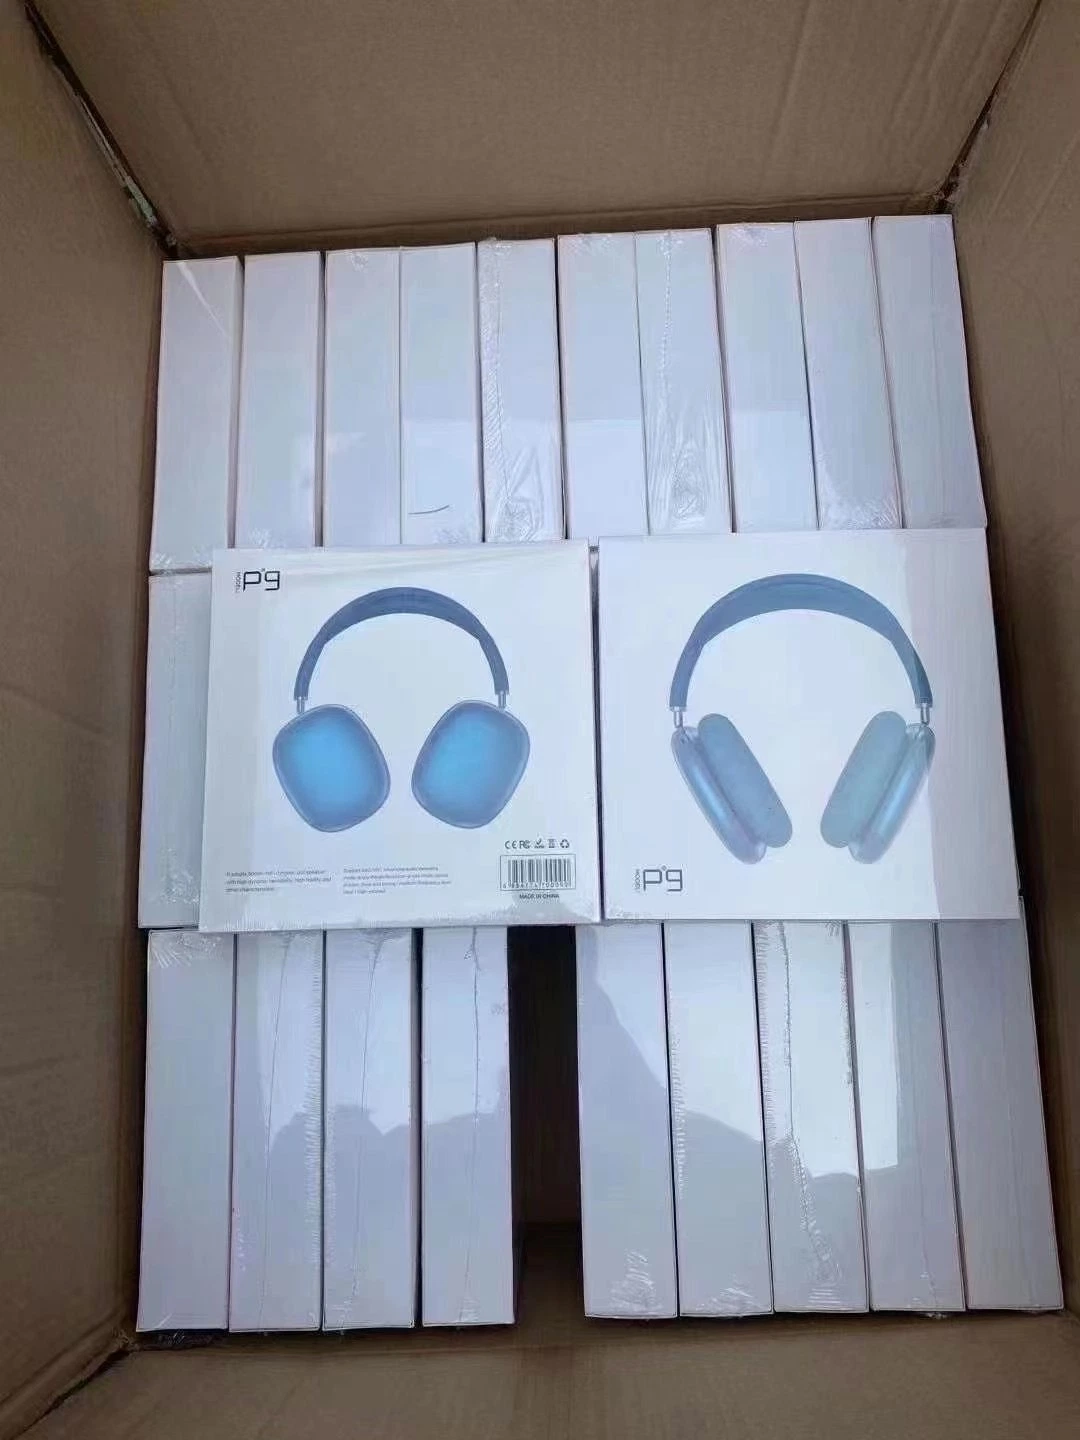 Latest Factory Price AAA Quality Airbuds Max Wireless Bluetooth Headphone Headset Wholesale/Supplier Handsfree Earpod Stereo Earbuds Earphone Accessories